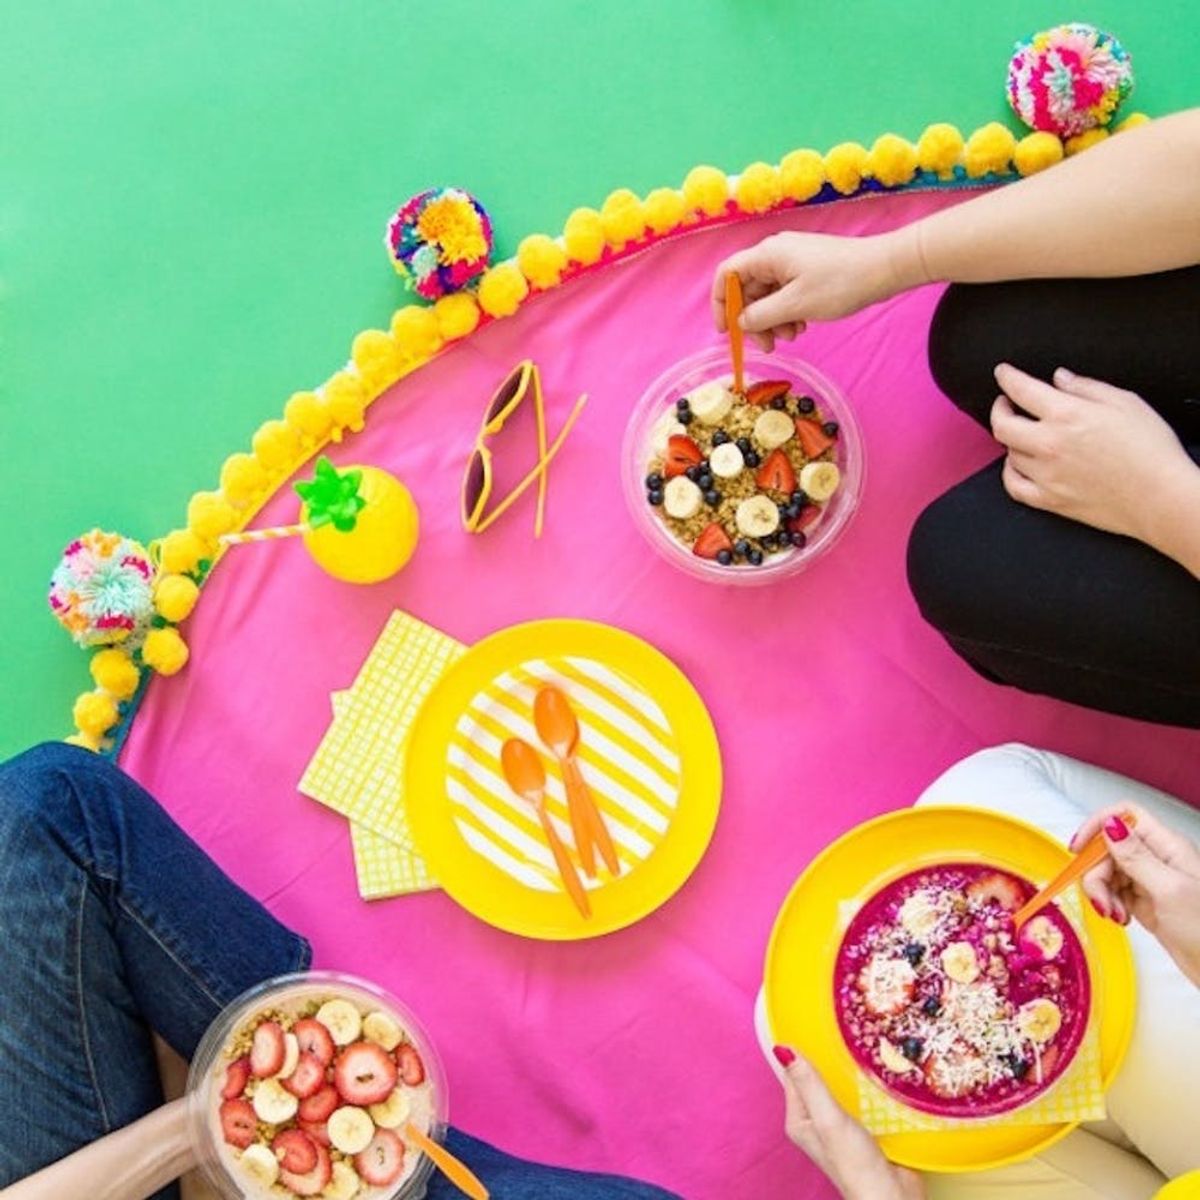 What to Make This Weekend: Mini Zen Garden, Pom Pom Picnic Blanket + More